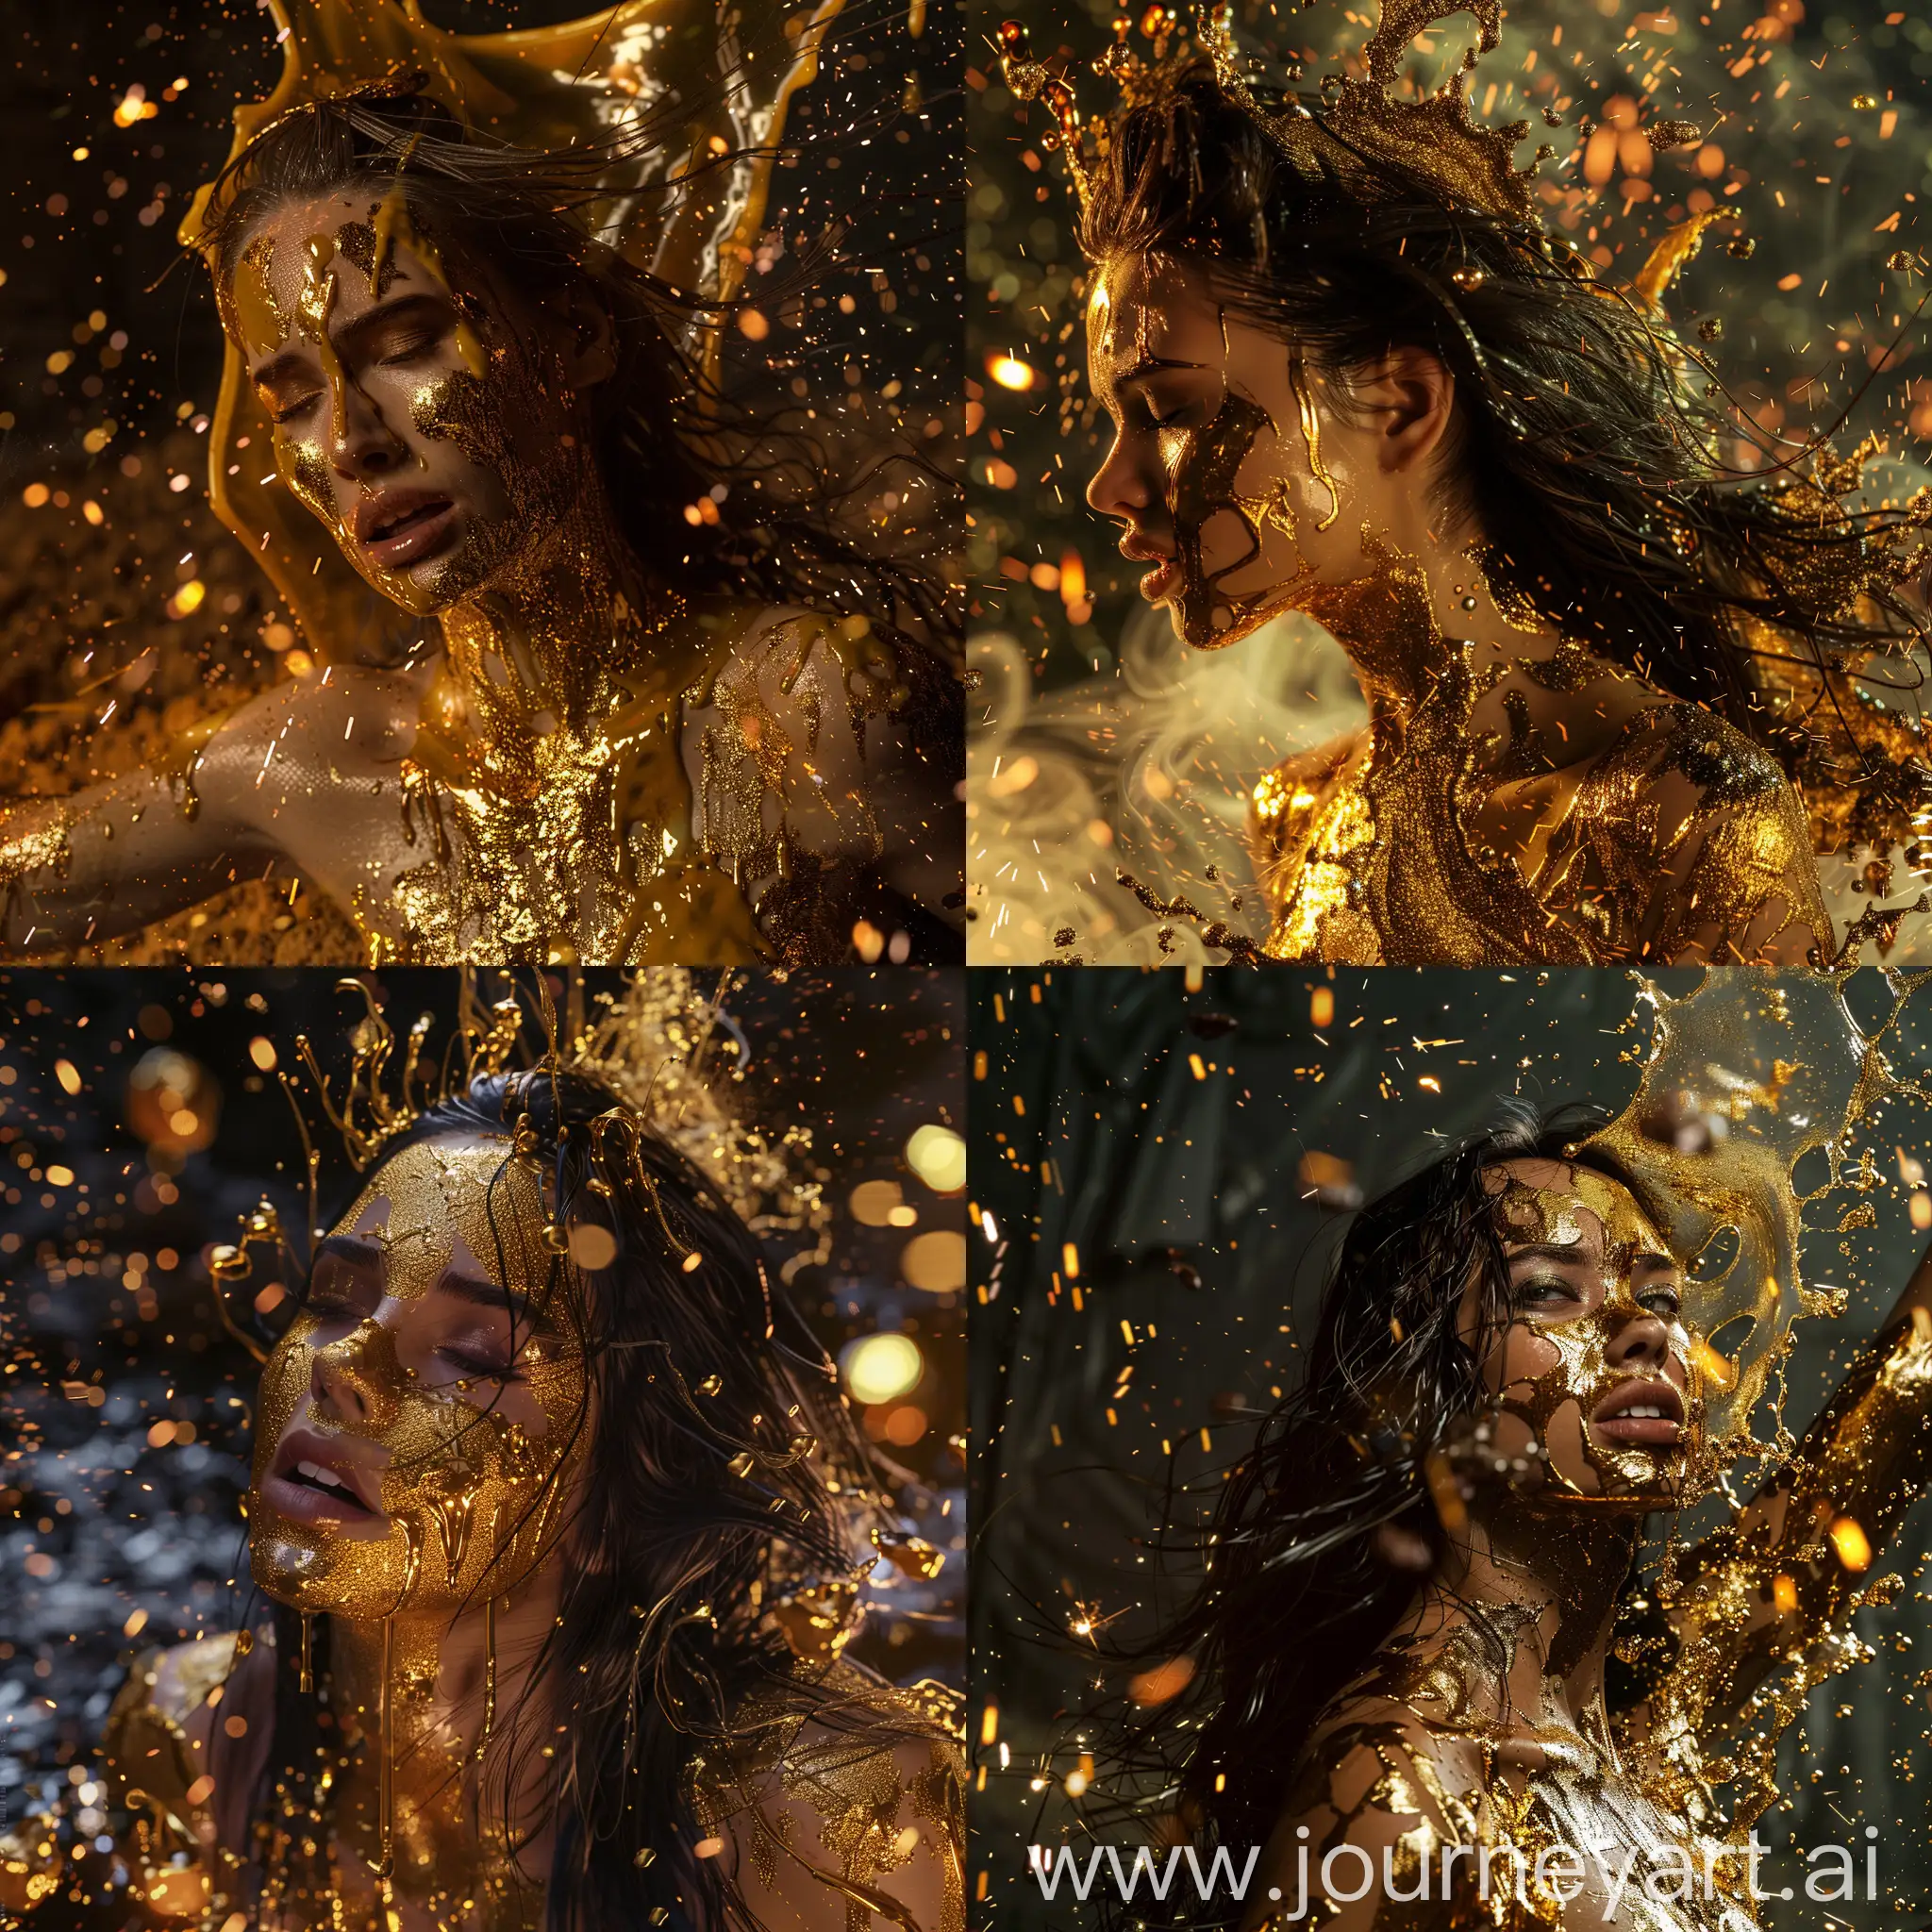 Liquid-Gold-Goddess-in-Unusual-Modeling-Pose-surrounded-by-Hot-Ashes-and-Sparks